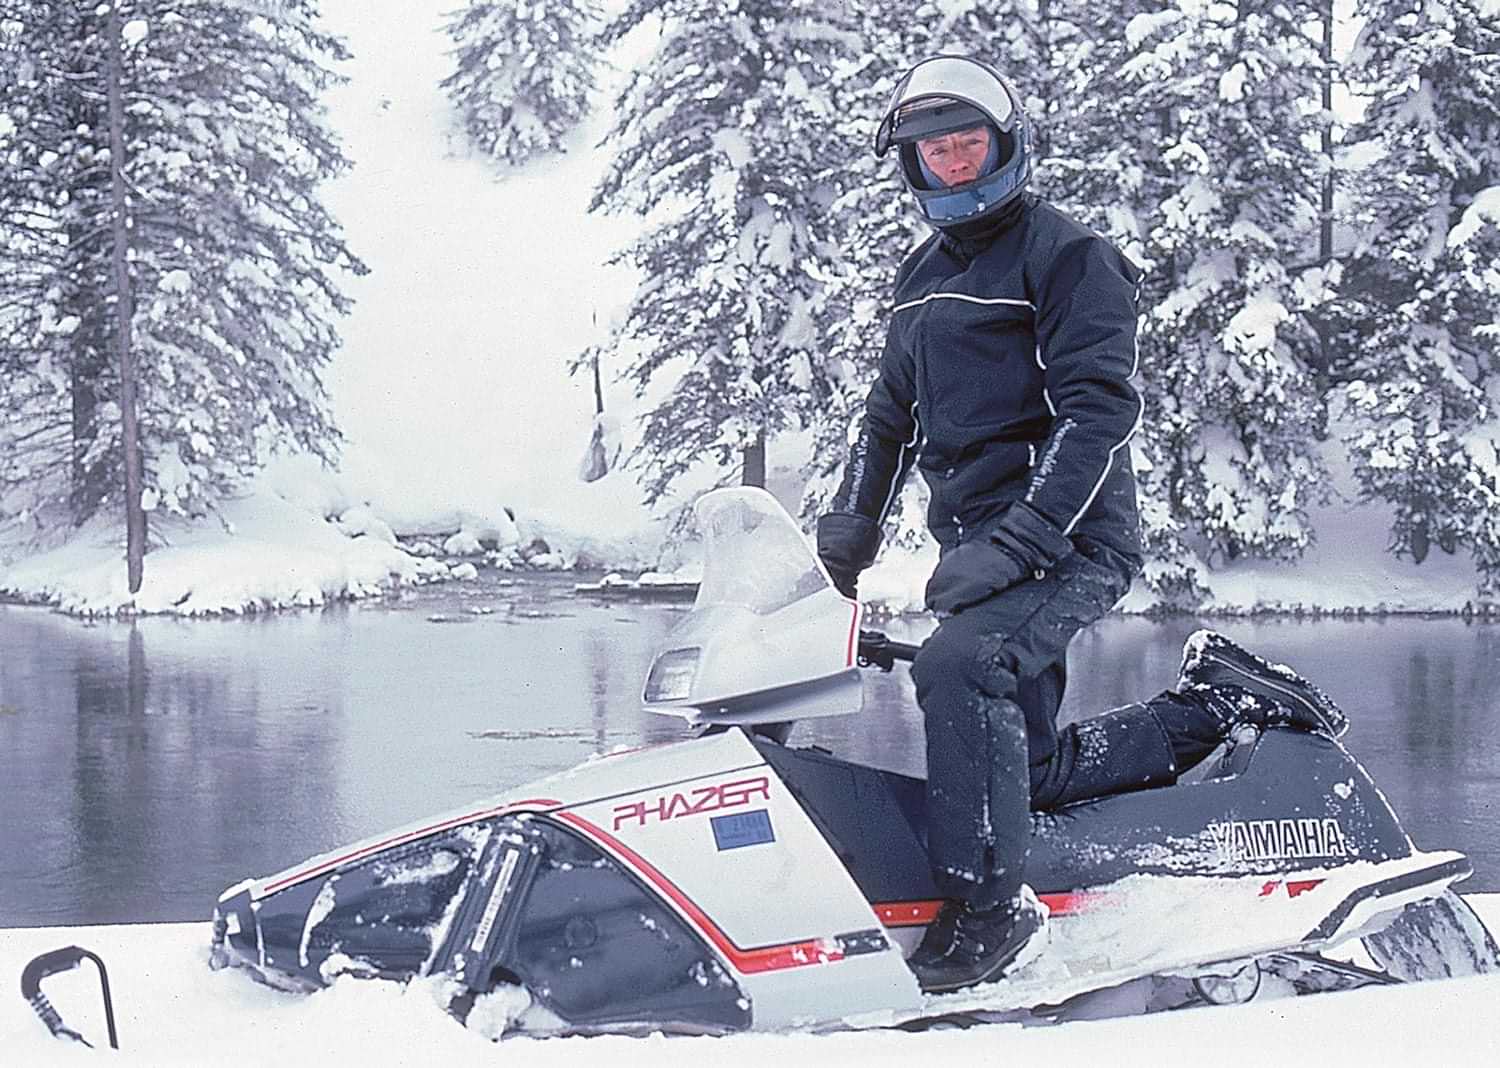 Darryl Harris, wearing a snow suit and helmet with a lifted goggle  is pictured on a Yamaha Phazer parked beside a lake surrounded by snow covered pines